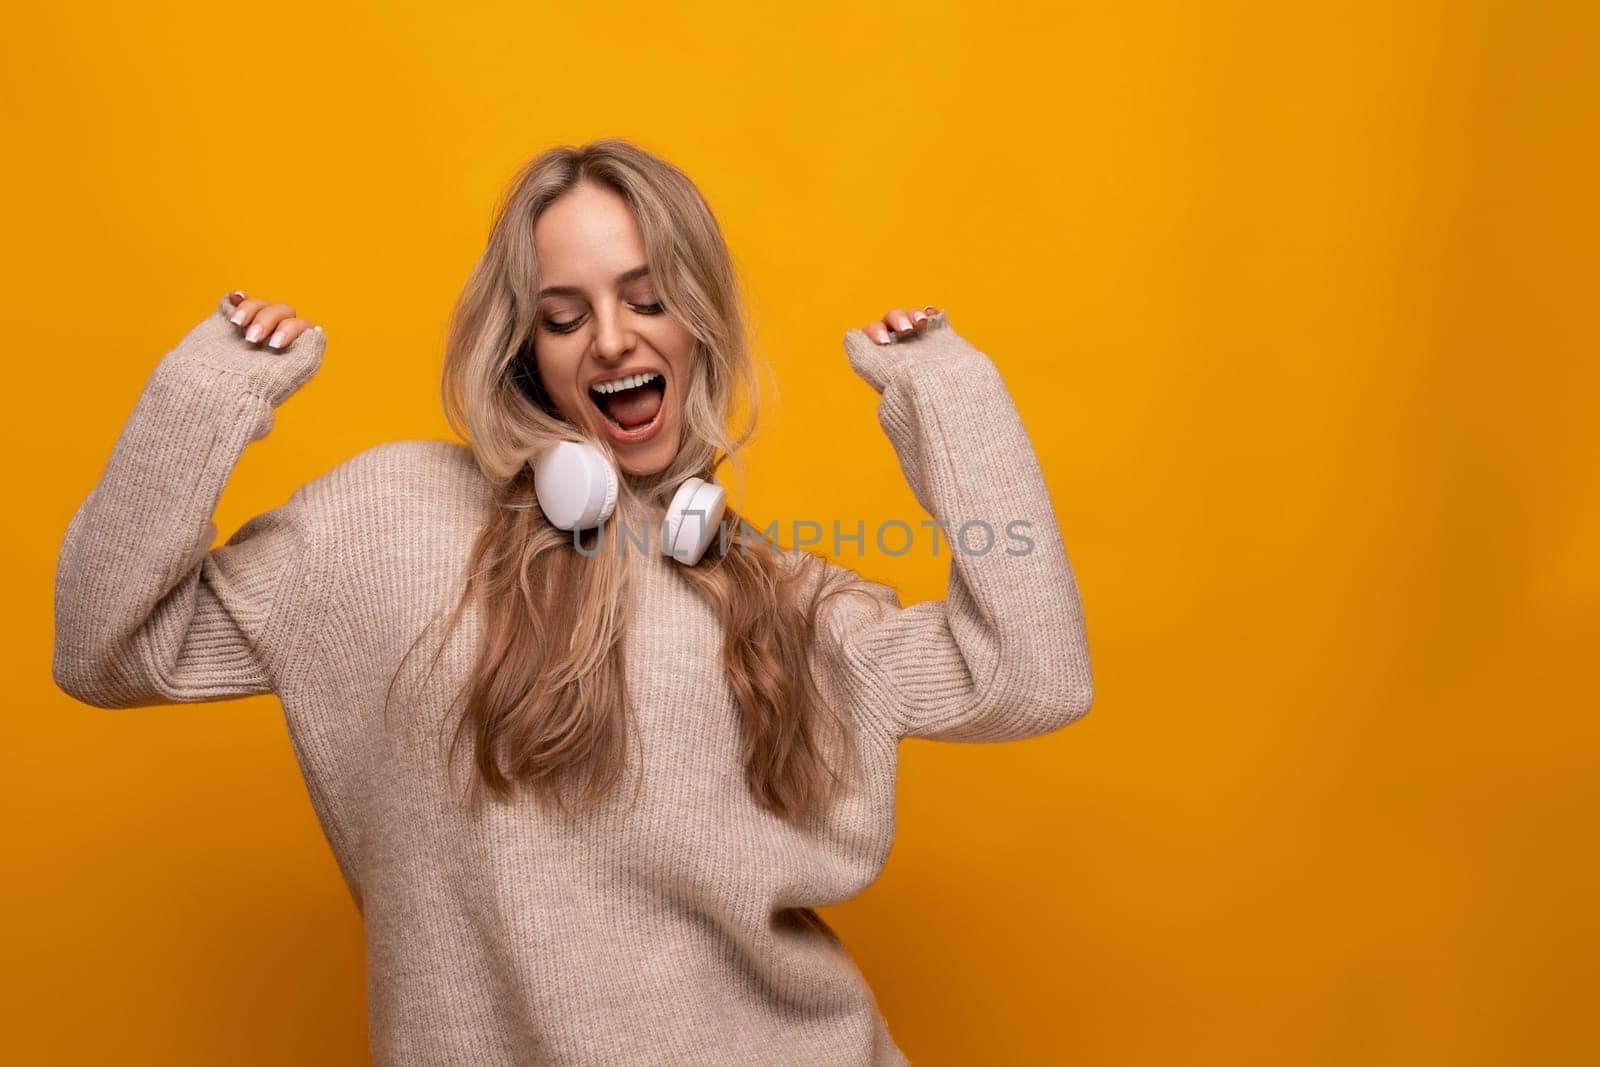 cute lady with headphones around her neck smiling on a yellow background by TRMK